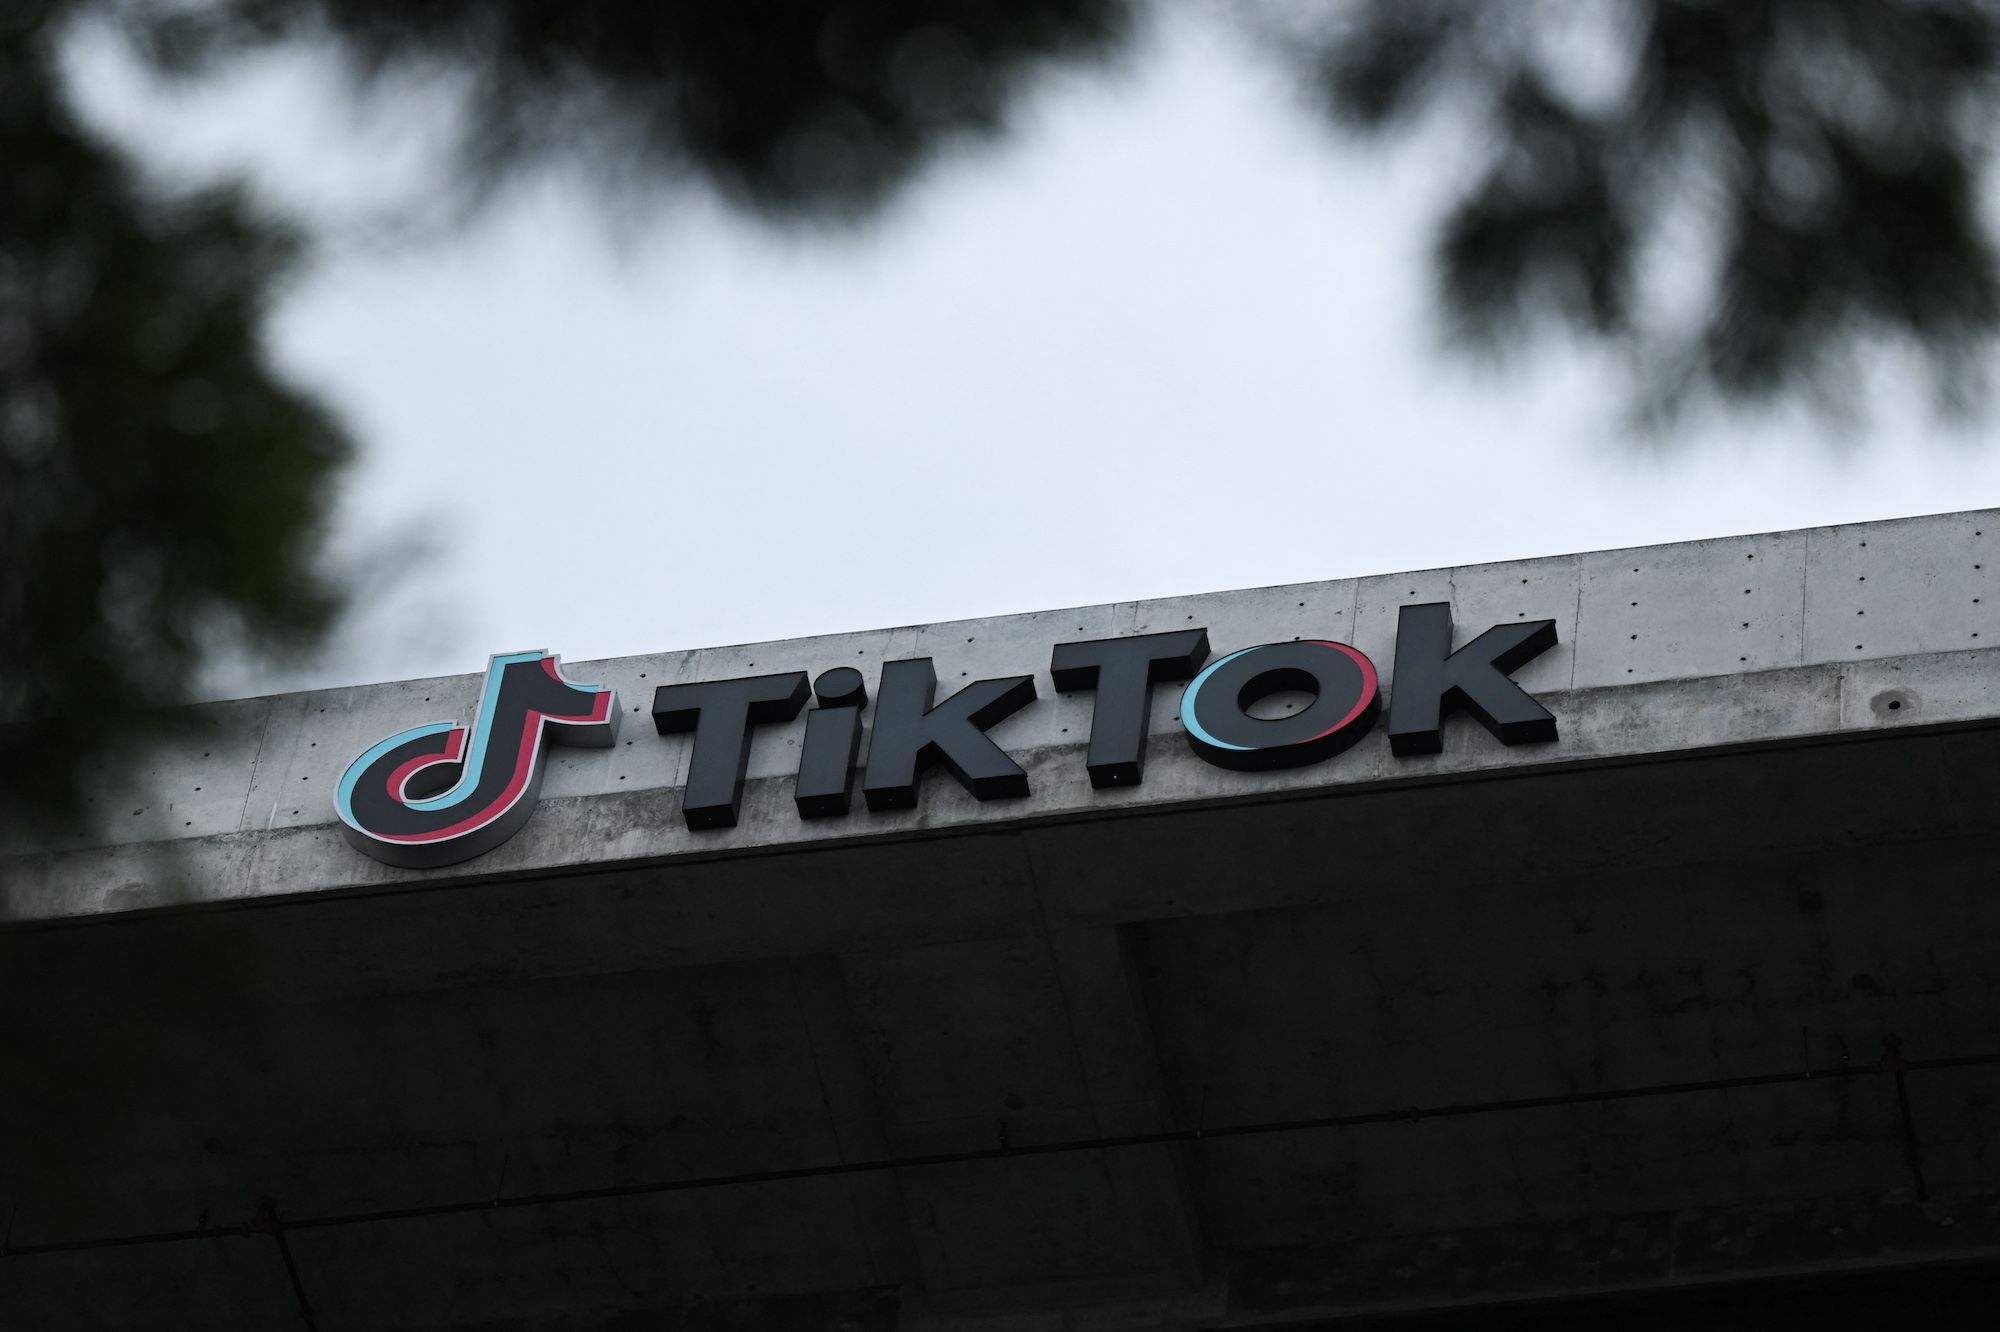 The TikTok logo is displayed on signage outside TikTok social media app company offices in Culver C...